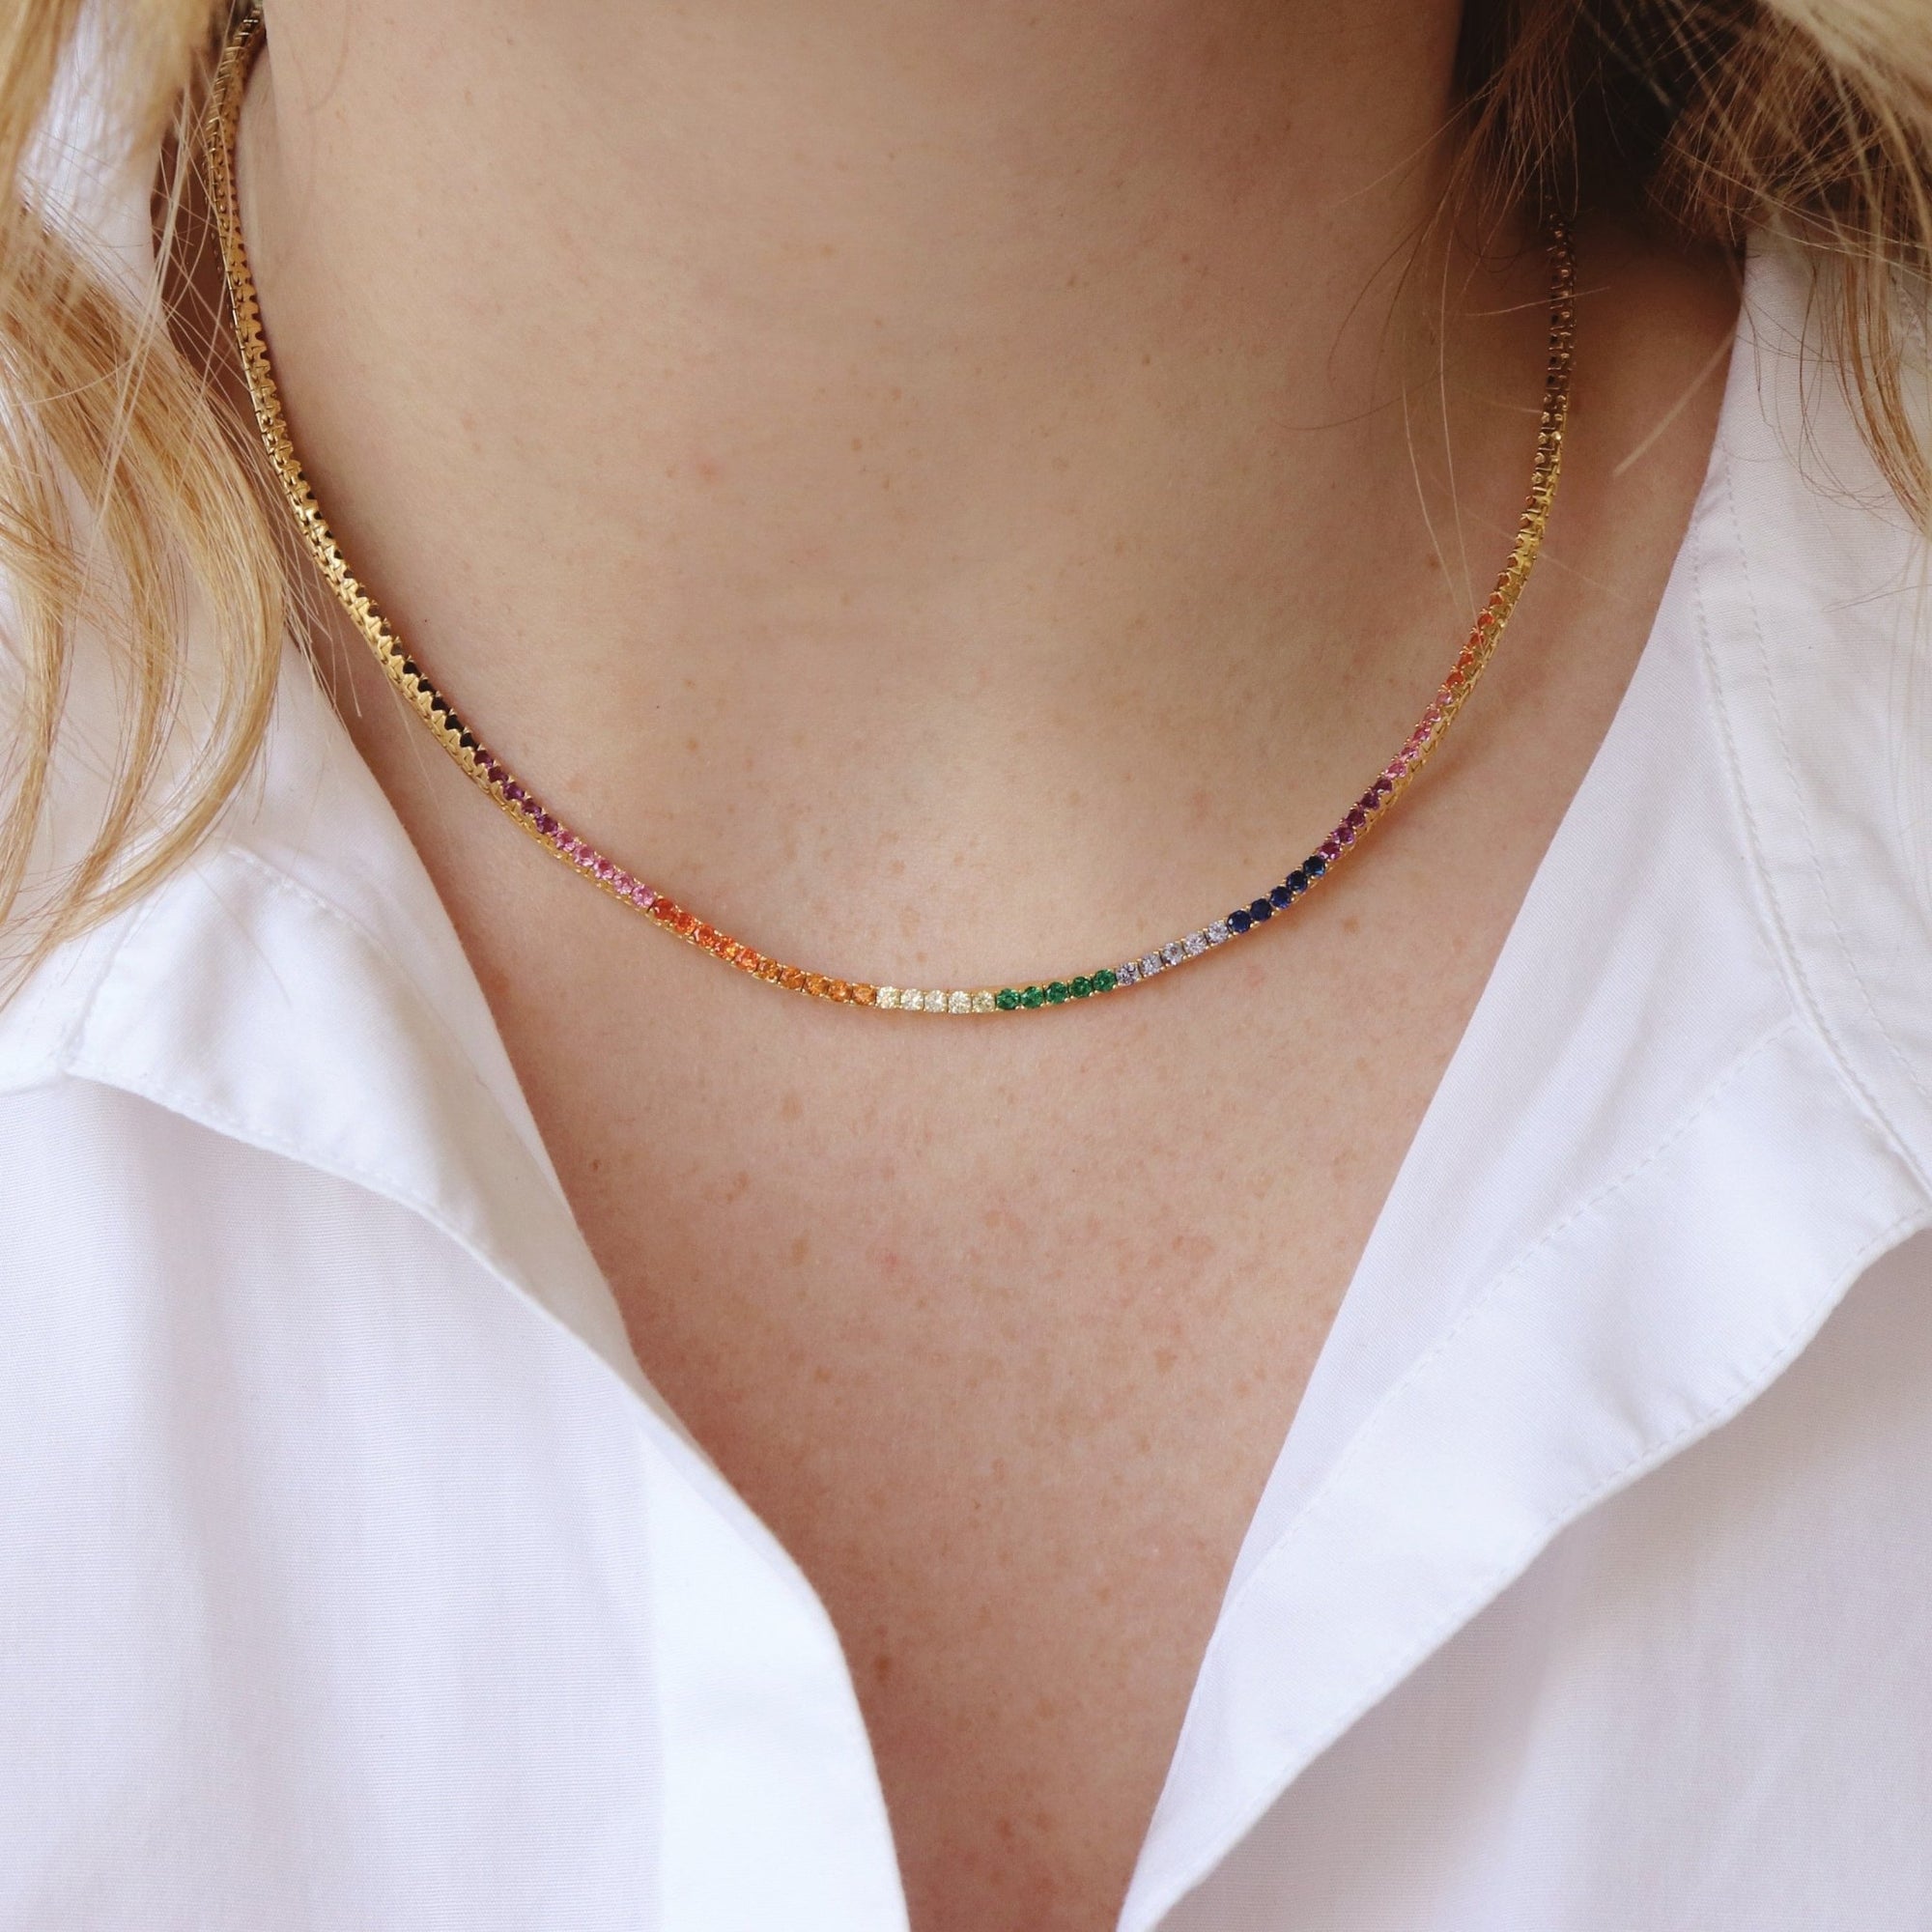 LOVE TENNIS NECKLACE - RAINBOW CUBIC ZIRCONIA & GOLD - SO PRETTY CARA COTTER